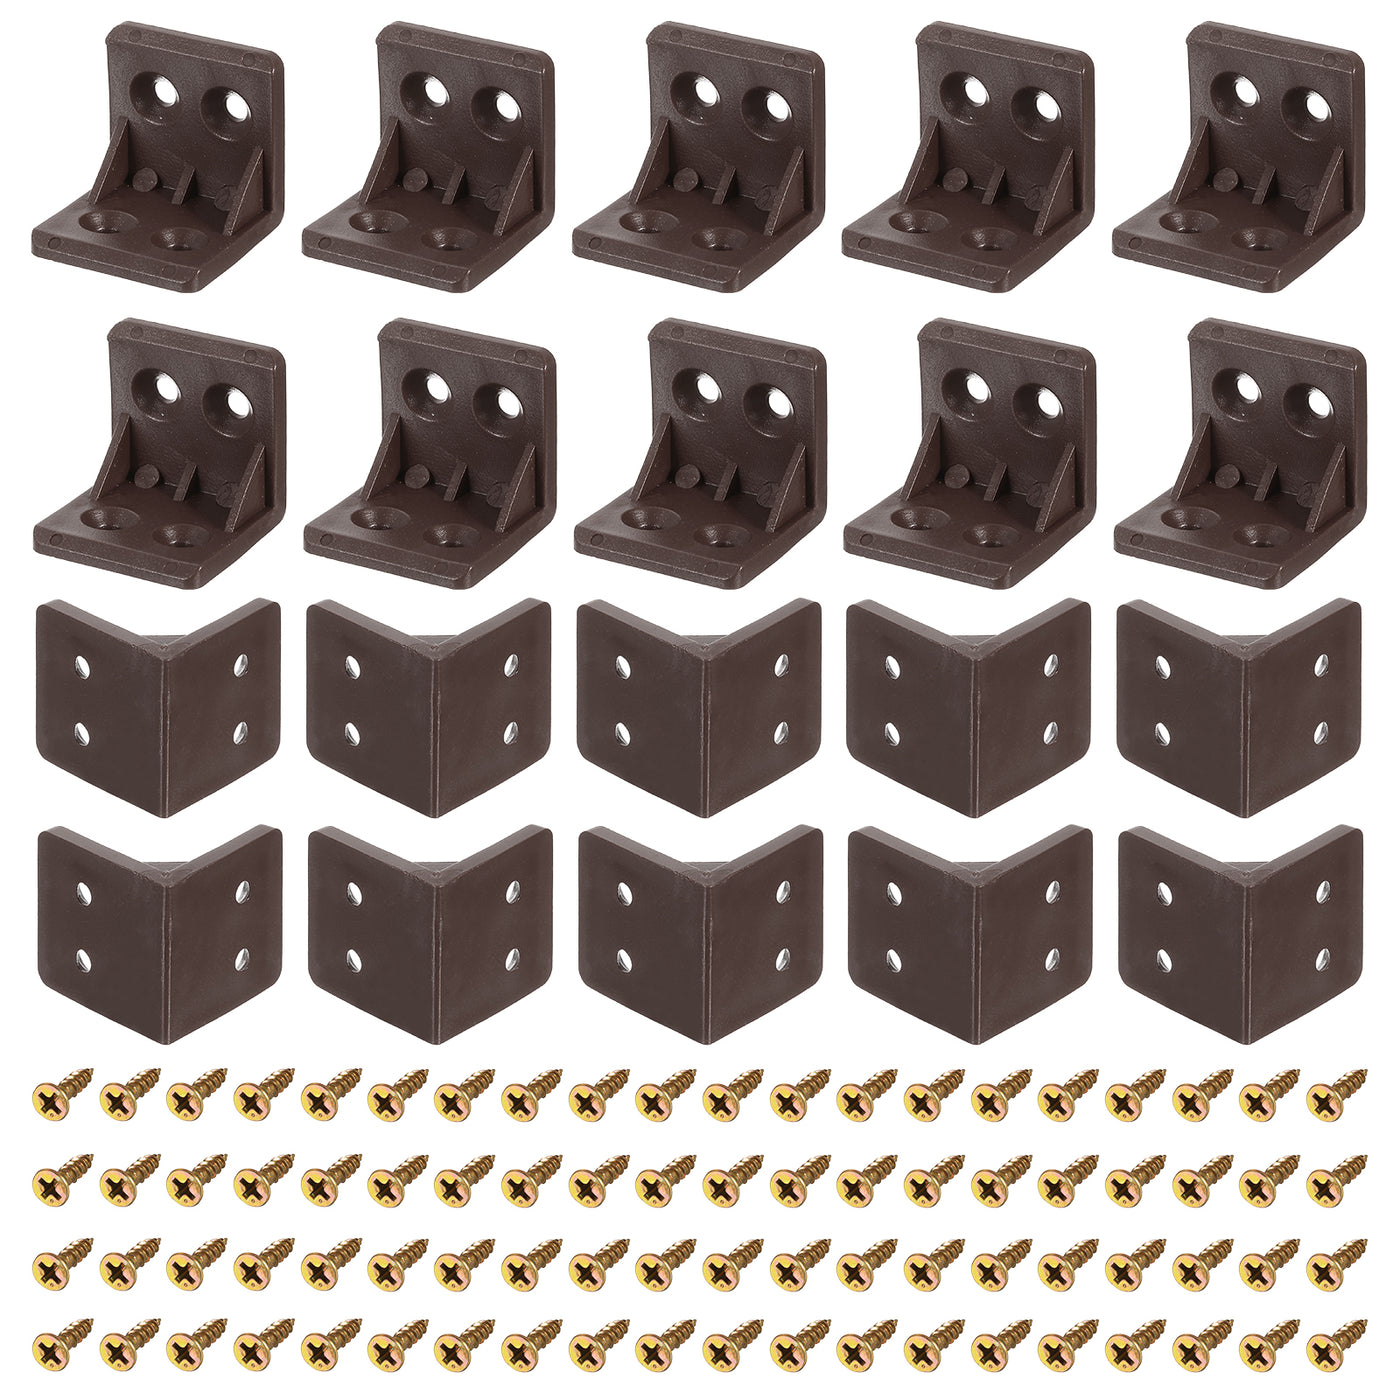 uxcell Uxcell 30Pcs 90 Degree Plastic Corner Braces, 27.3x27x27mm Nylon Shelf Right Angle Brackets with Screws for Cabinets, Cupboards (Brown)